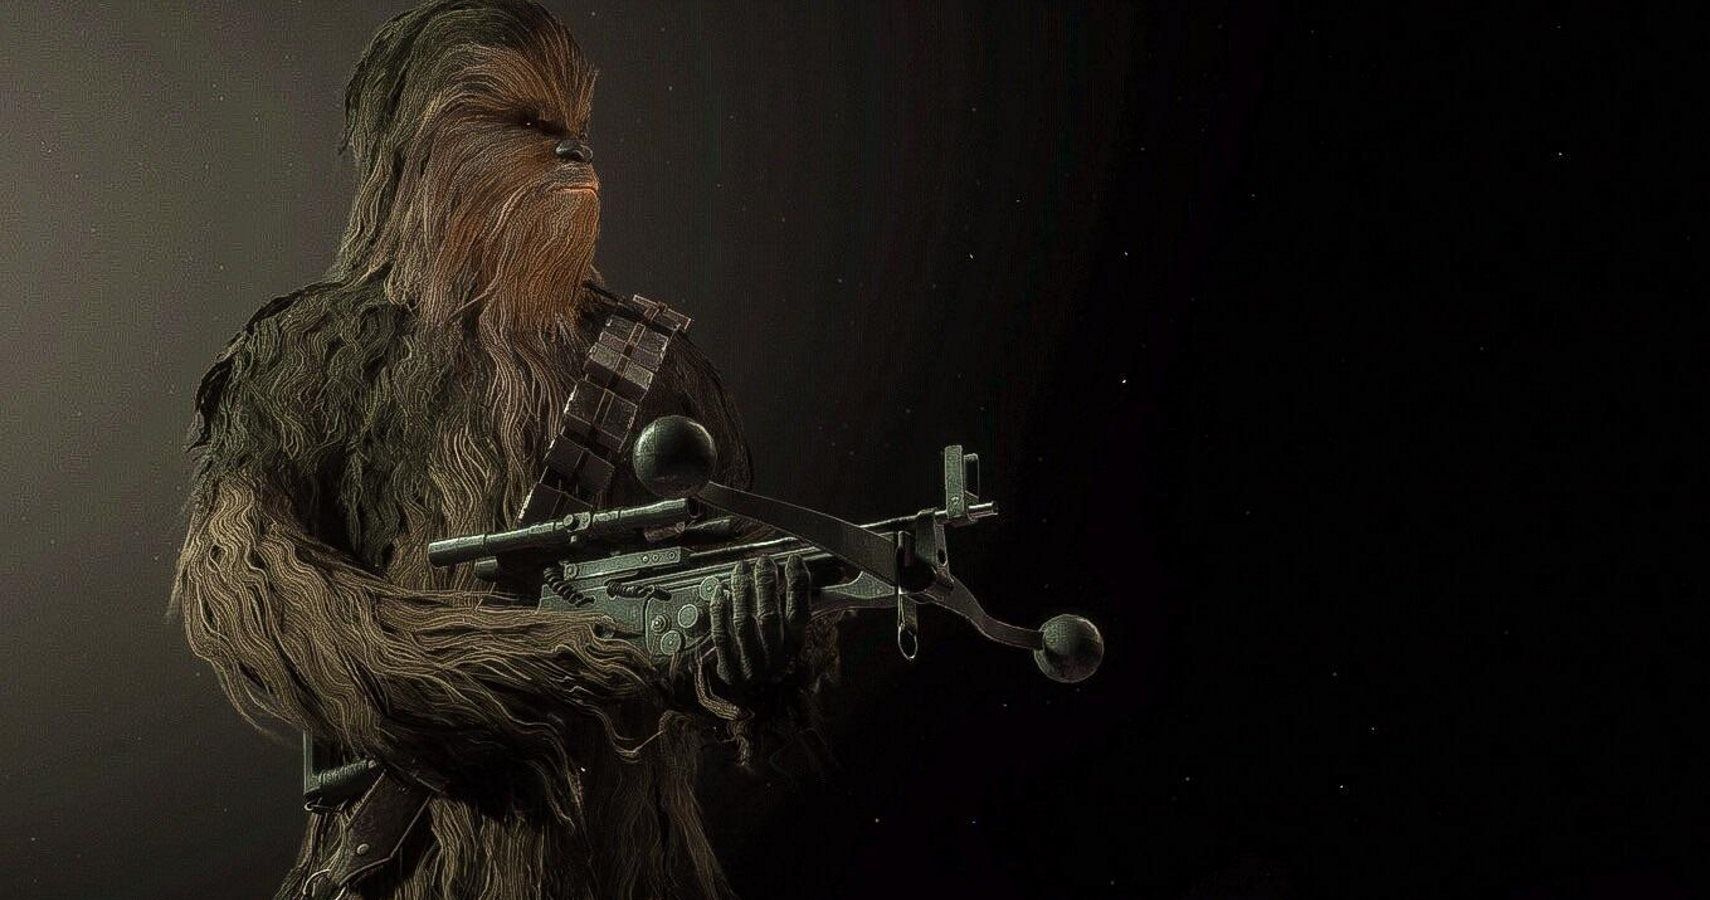 Star Wars Battlefront II Plays Tribute To Chewbacca Actor Peter Mayhew